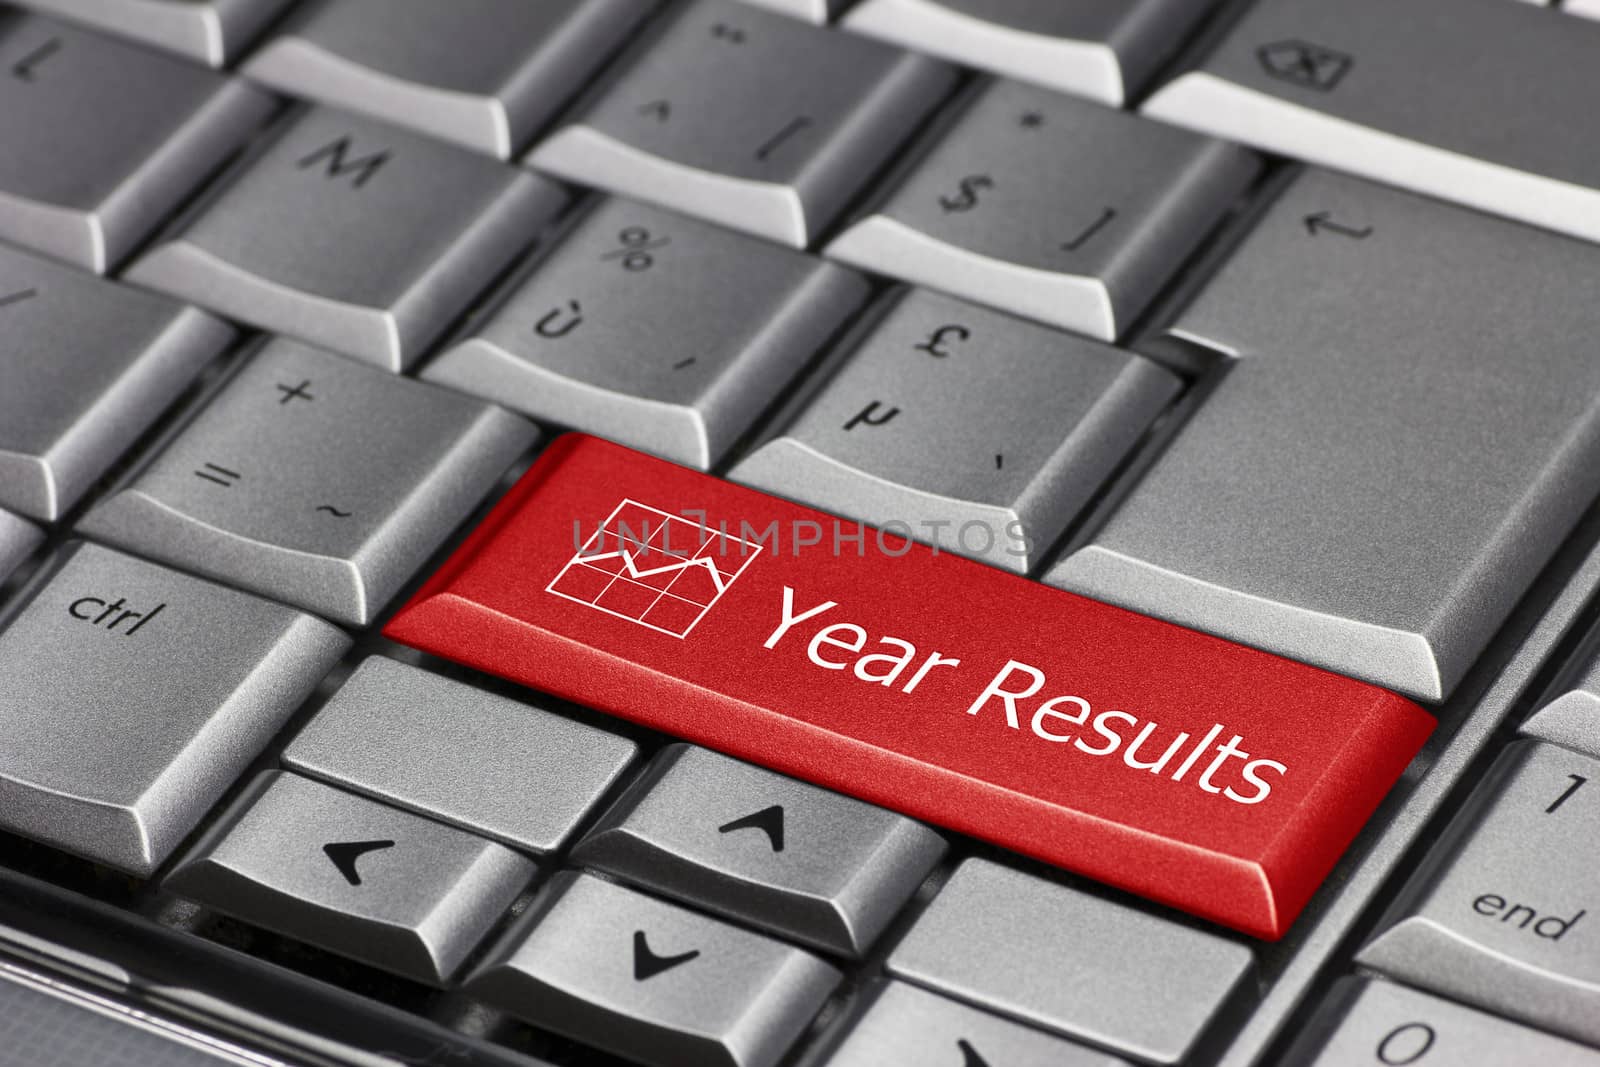 Computer key - Year Results by jurgenfr